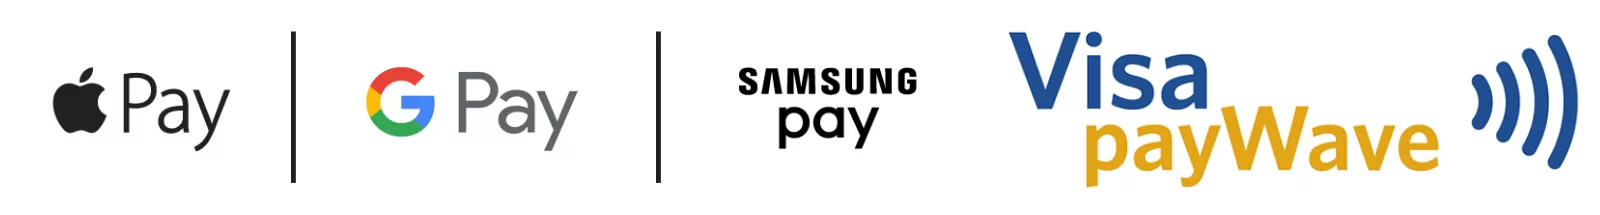 Apple Pay, Google Pay, Samsung Pay, and Visa Contactless payWave available on all CW cards